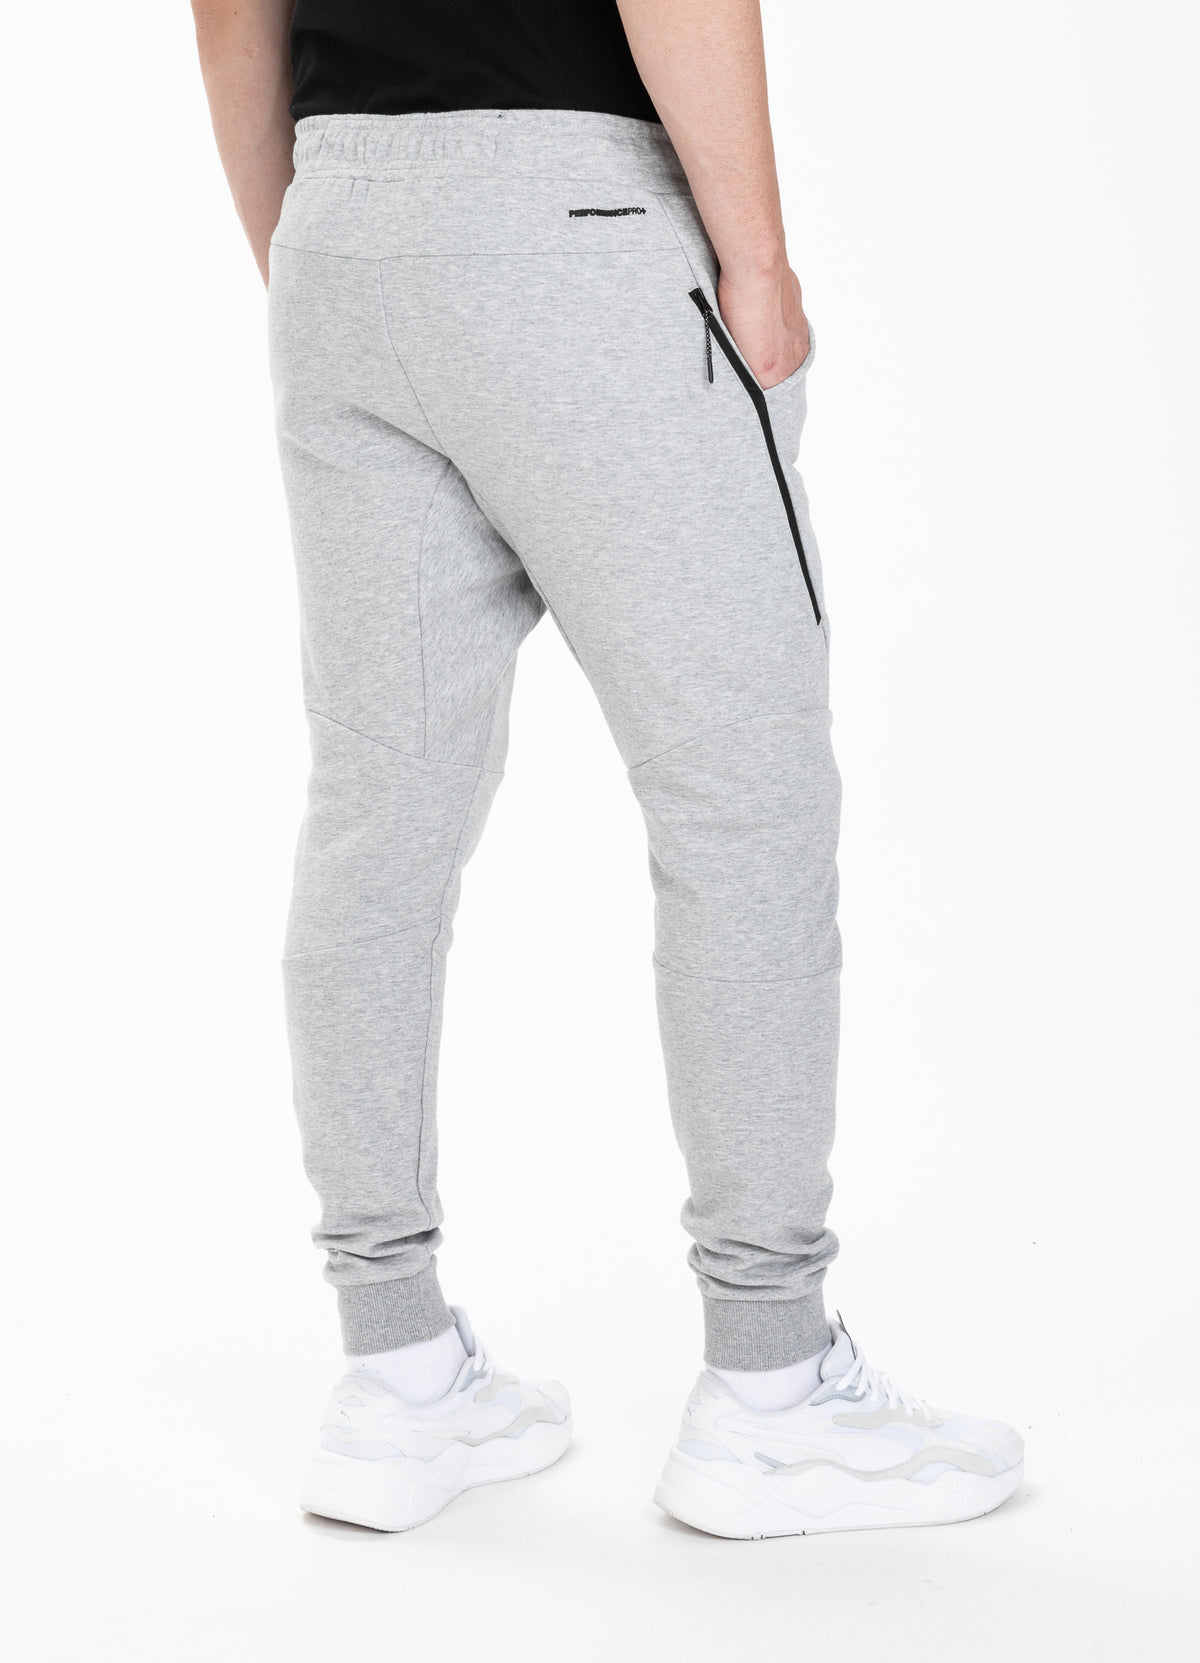 ADCC Grey Joggers.